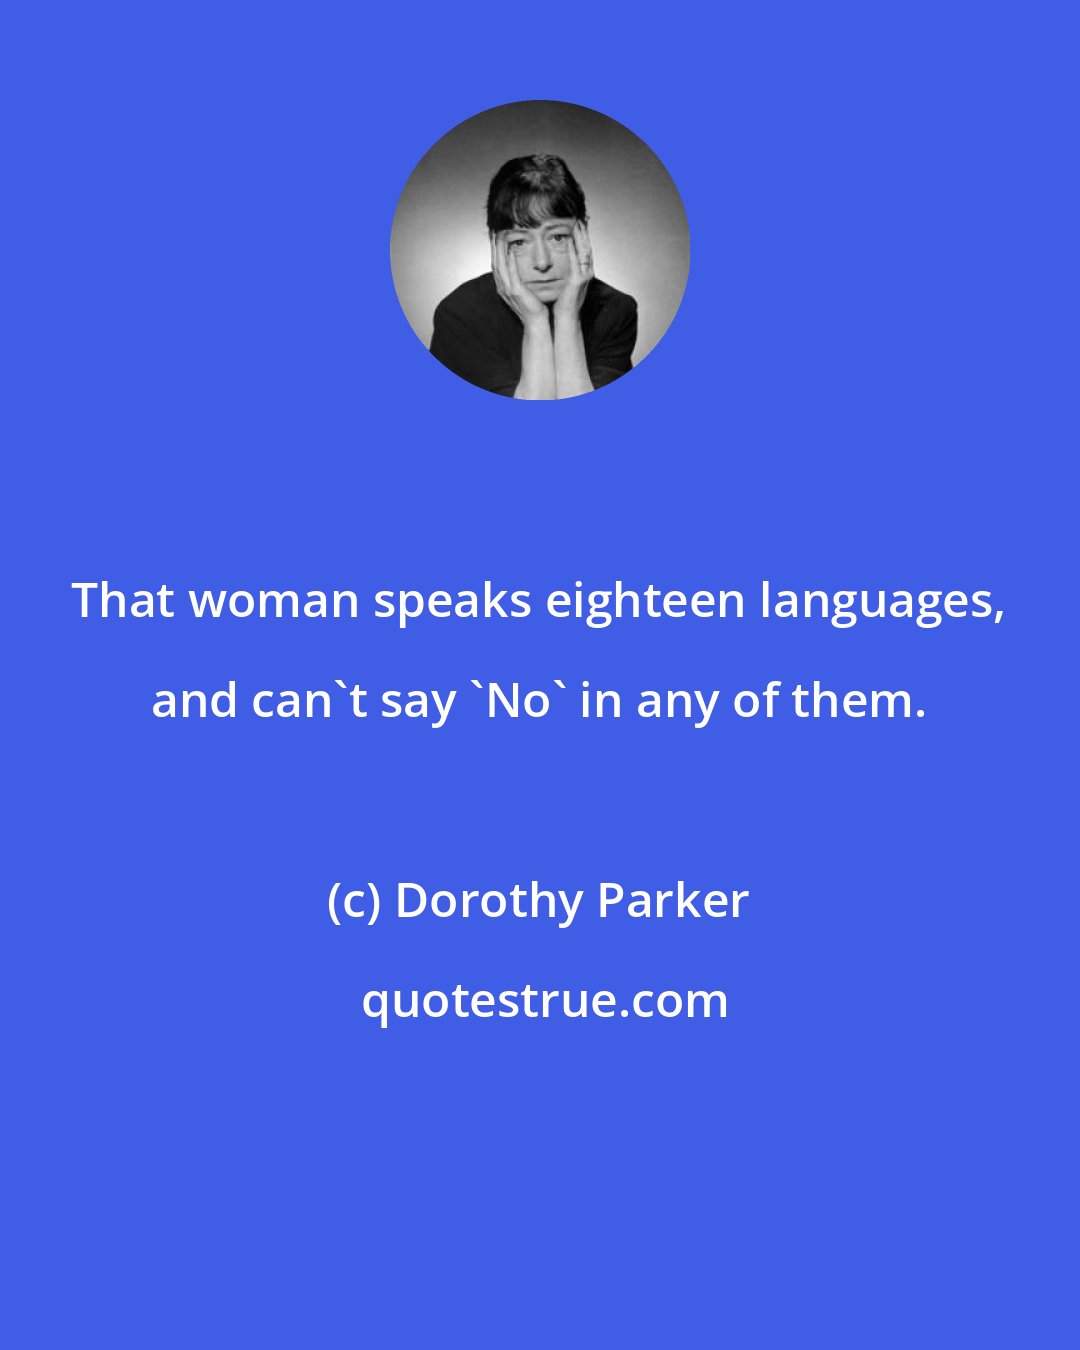 Dorothy Parker: That woman speaks eighteen languages, and can't say 'No' in any of them.